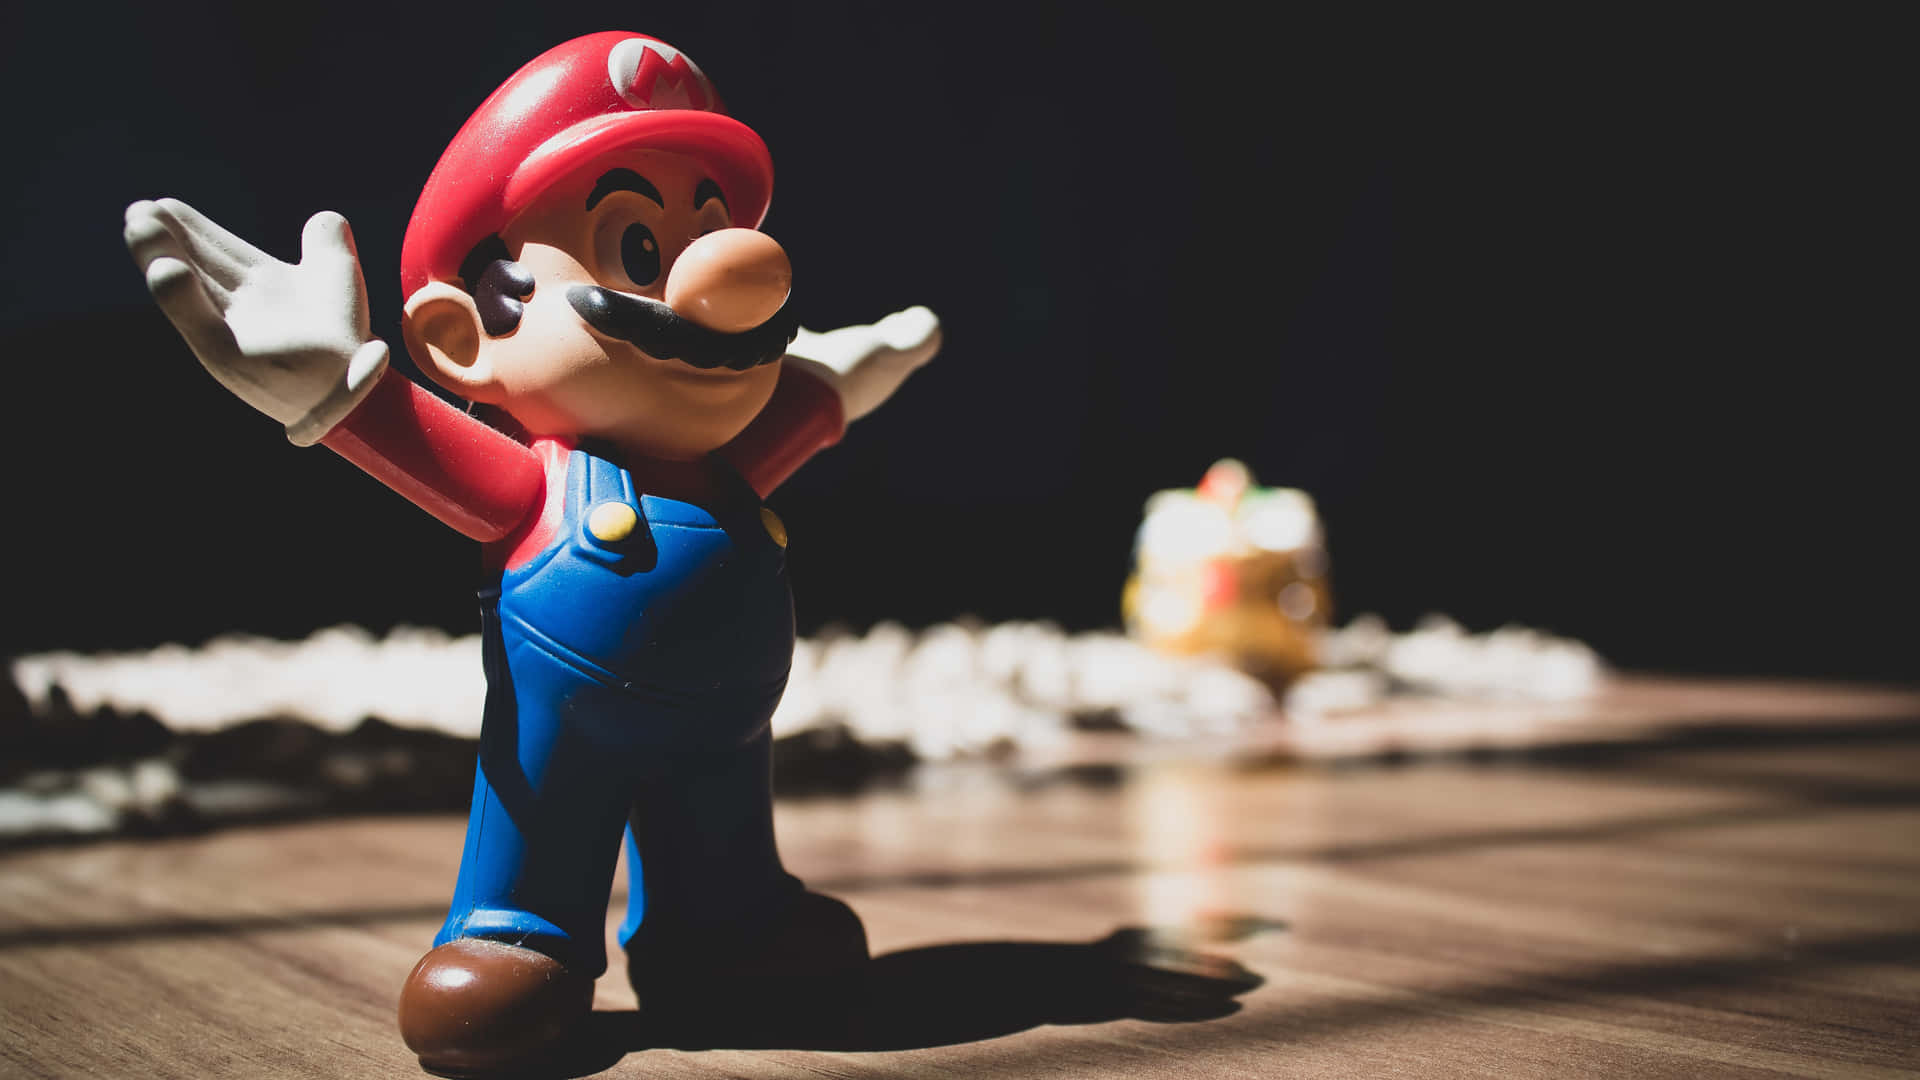 A Mario Figurine Is Standing In Front Of A Table Background